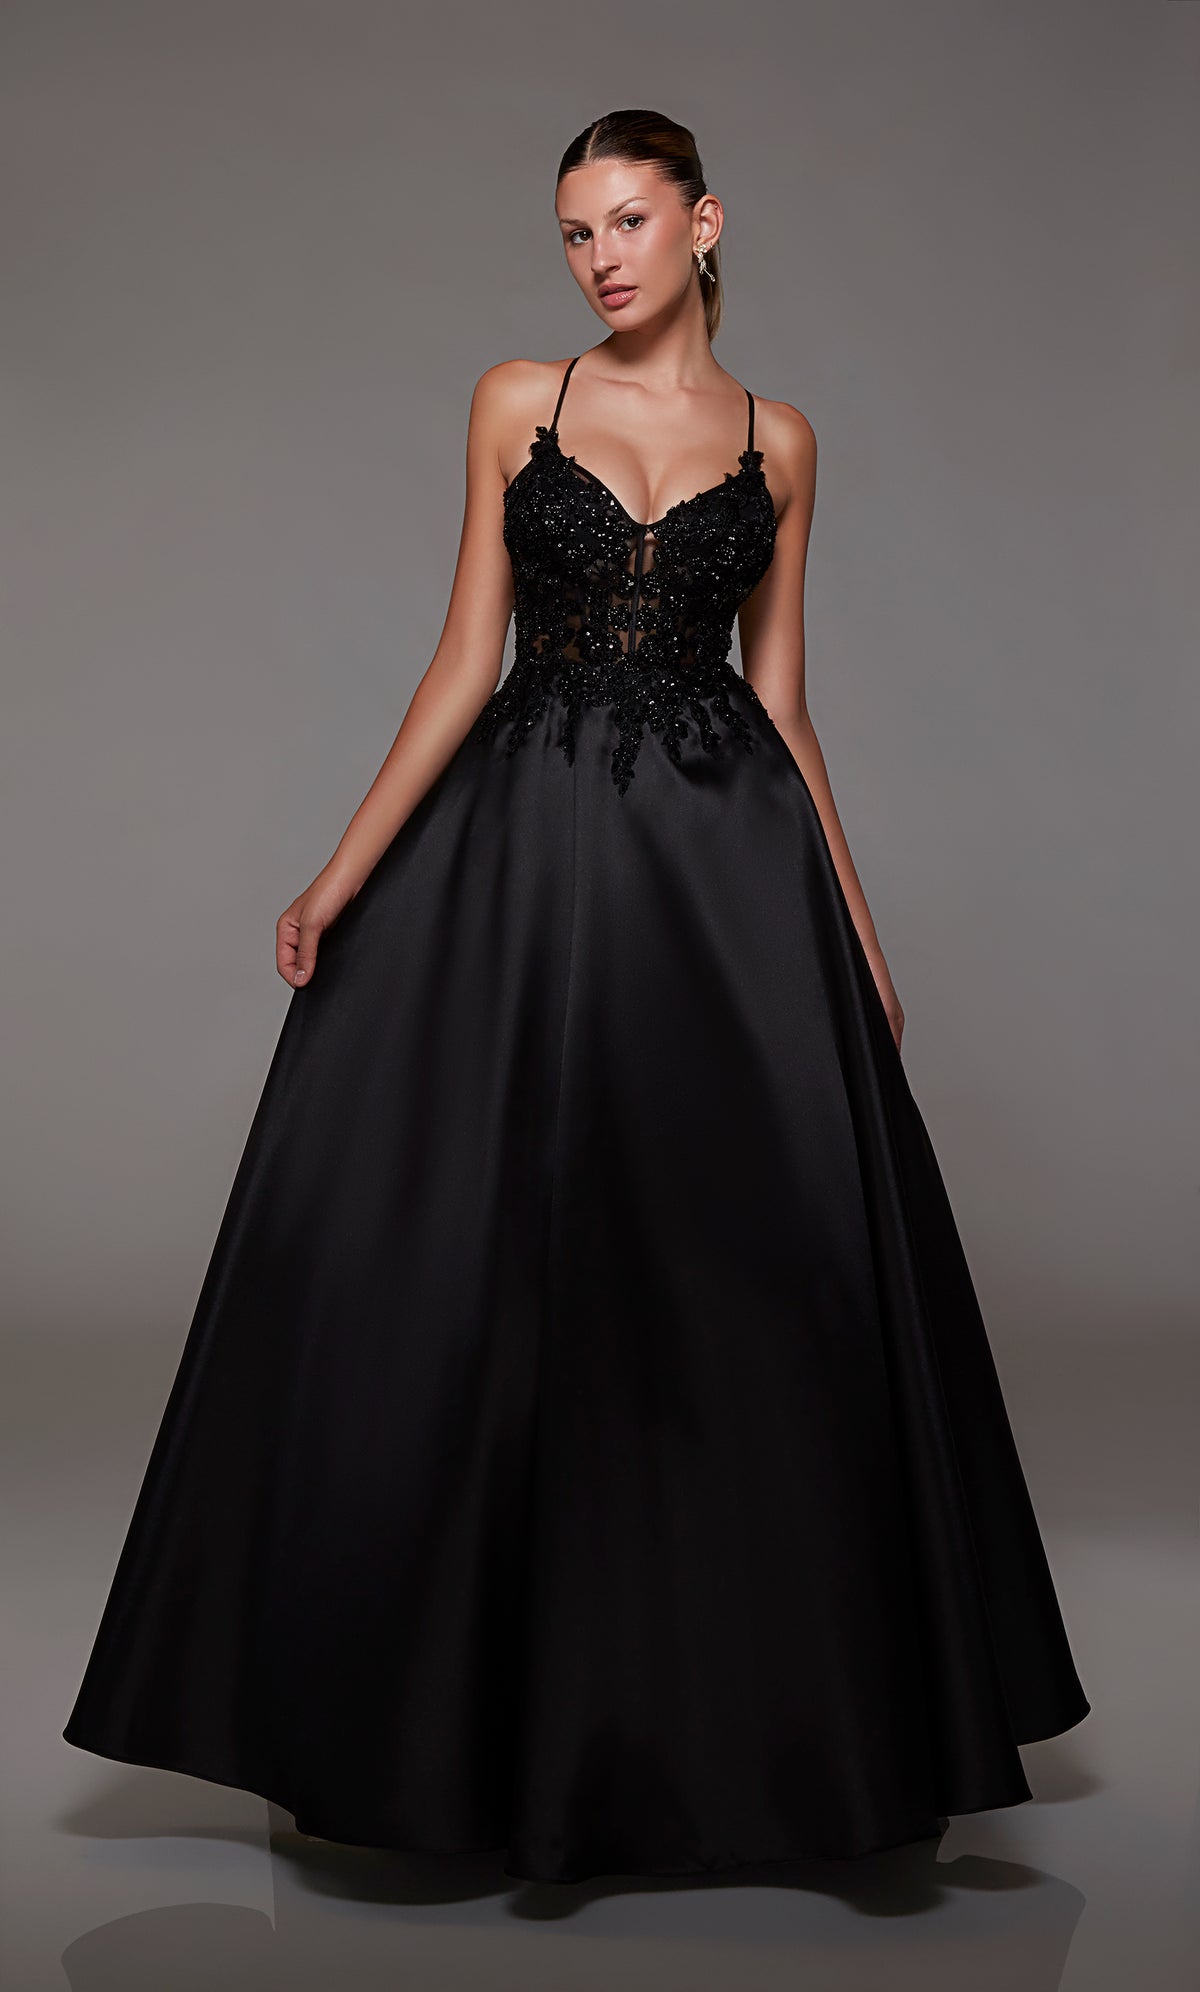 Black corset ball gown: V-neckline, sheer floral lace bodice, full mikado skirt, lace-up back for an captivating and timeless look.